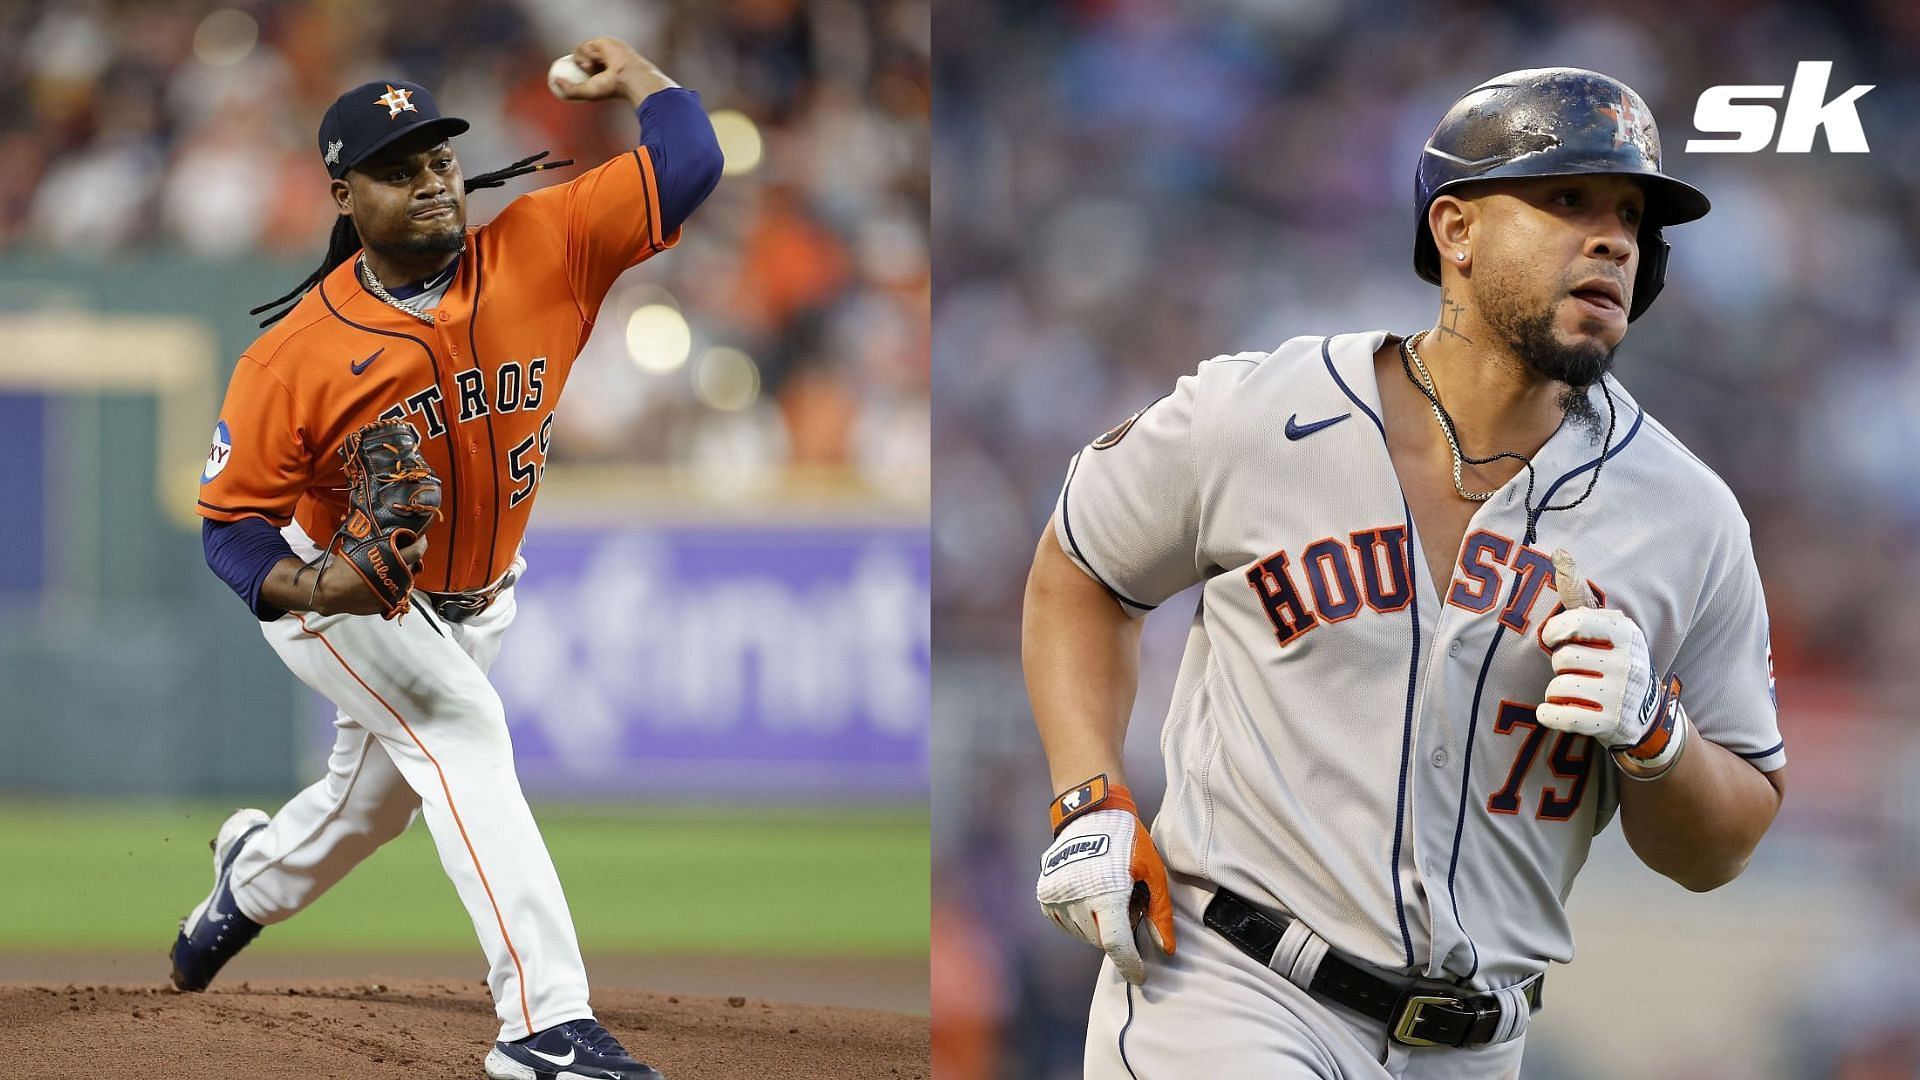 Framber Valdez and Jose Abreu are two player from the Houston Astros to monitor in 2024 MLB fantasy baseball drafts